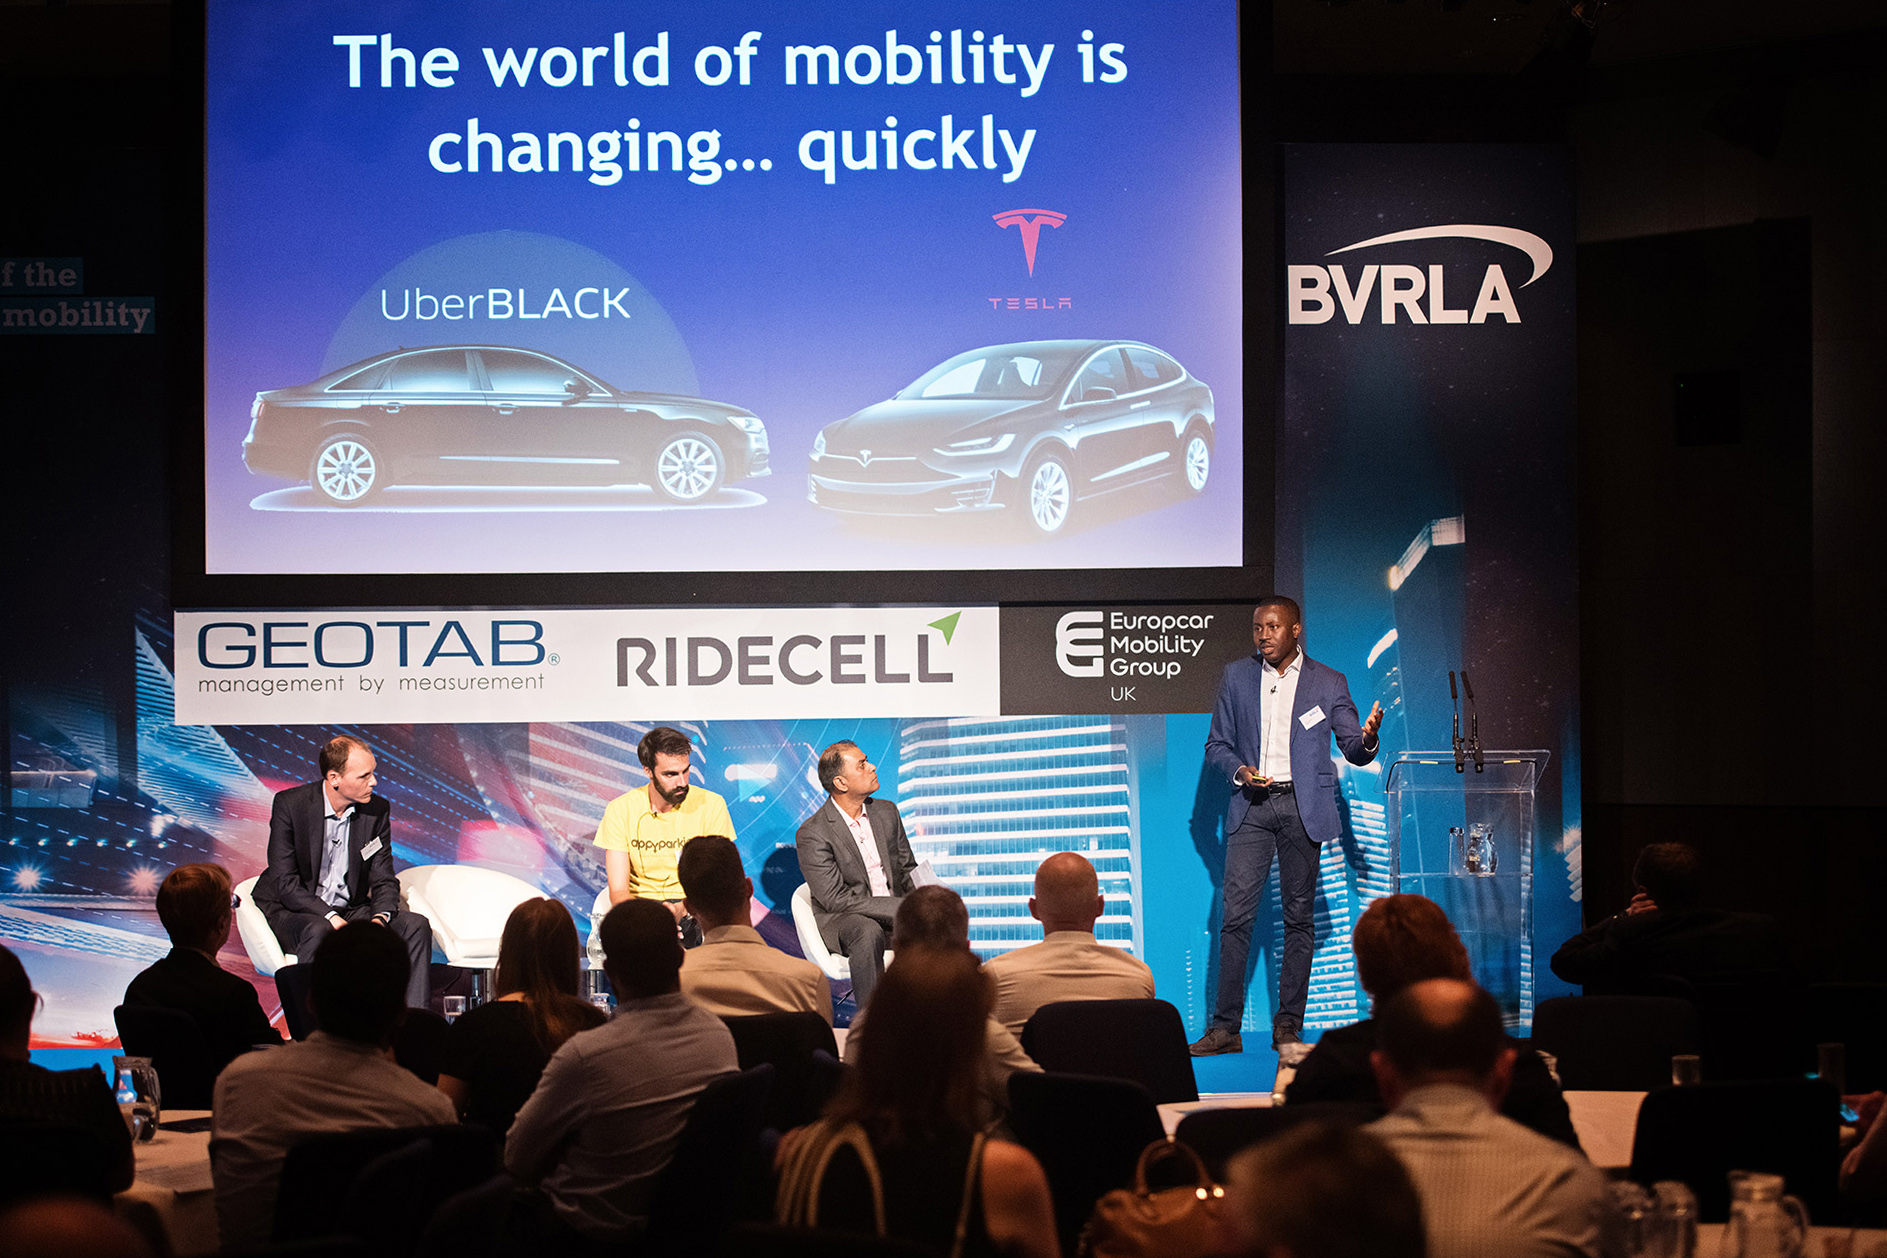 Speaker on stage at a Business conference in the Birmingham ICC with Uber Black and Tesla car.